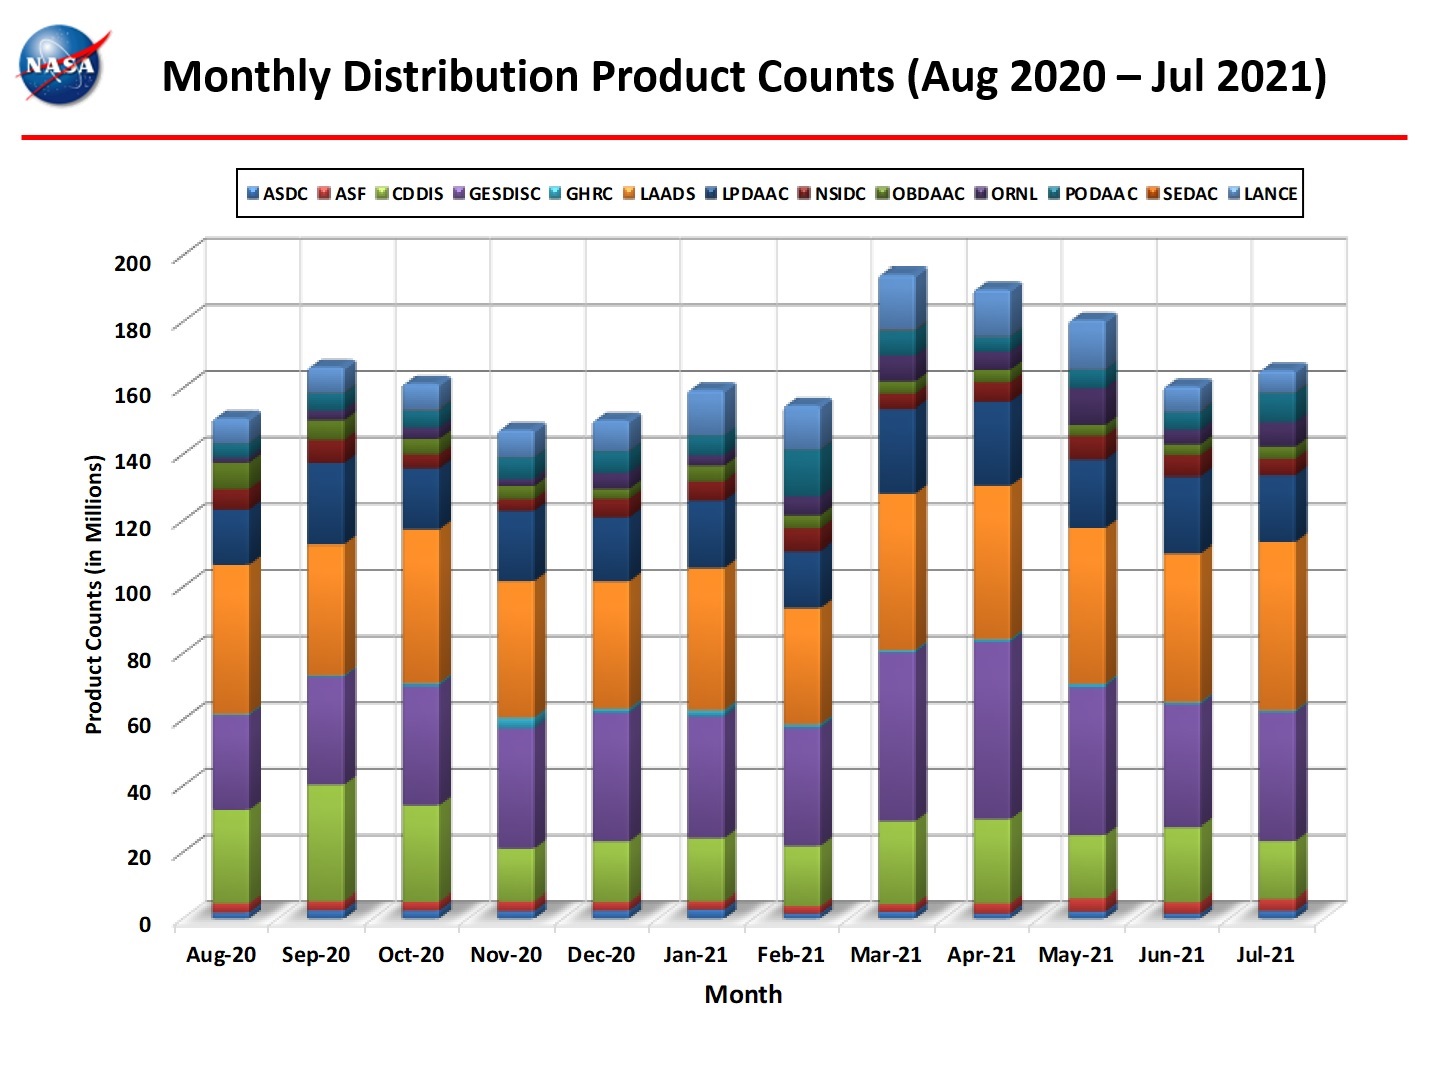 Monthly distribution Product Counts Aug 2020 thru July 2021